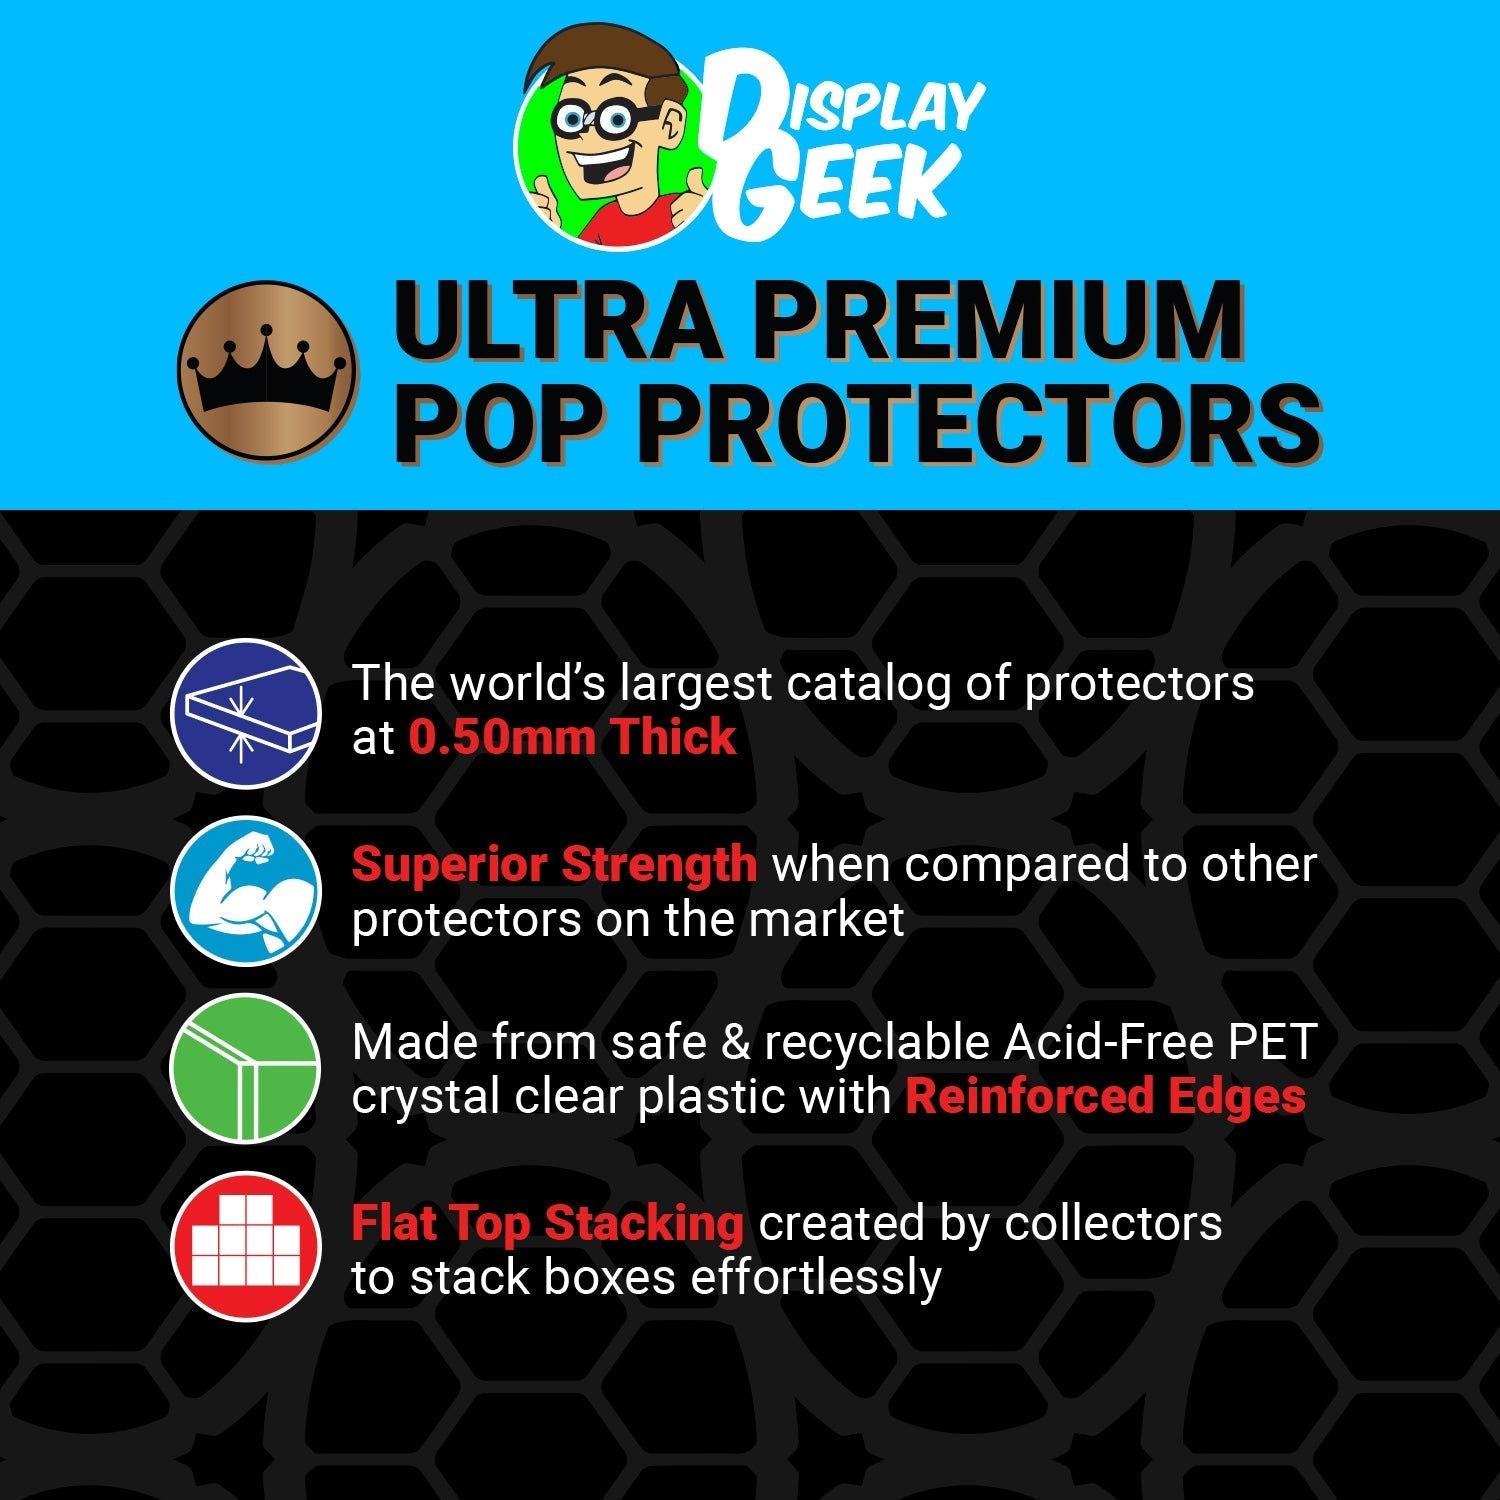 Pop Protector for Queen Greatest Hits #21 Funko Pop Albums Deluxe - PPG Pop Protector Guide Search Created by Display Geek